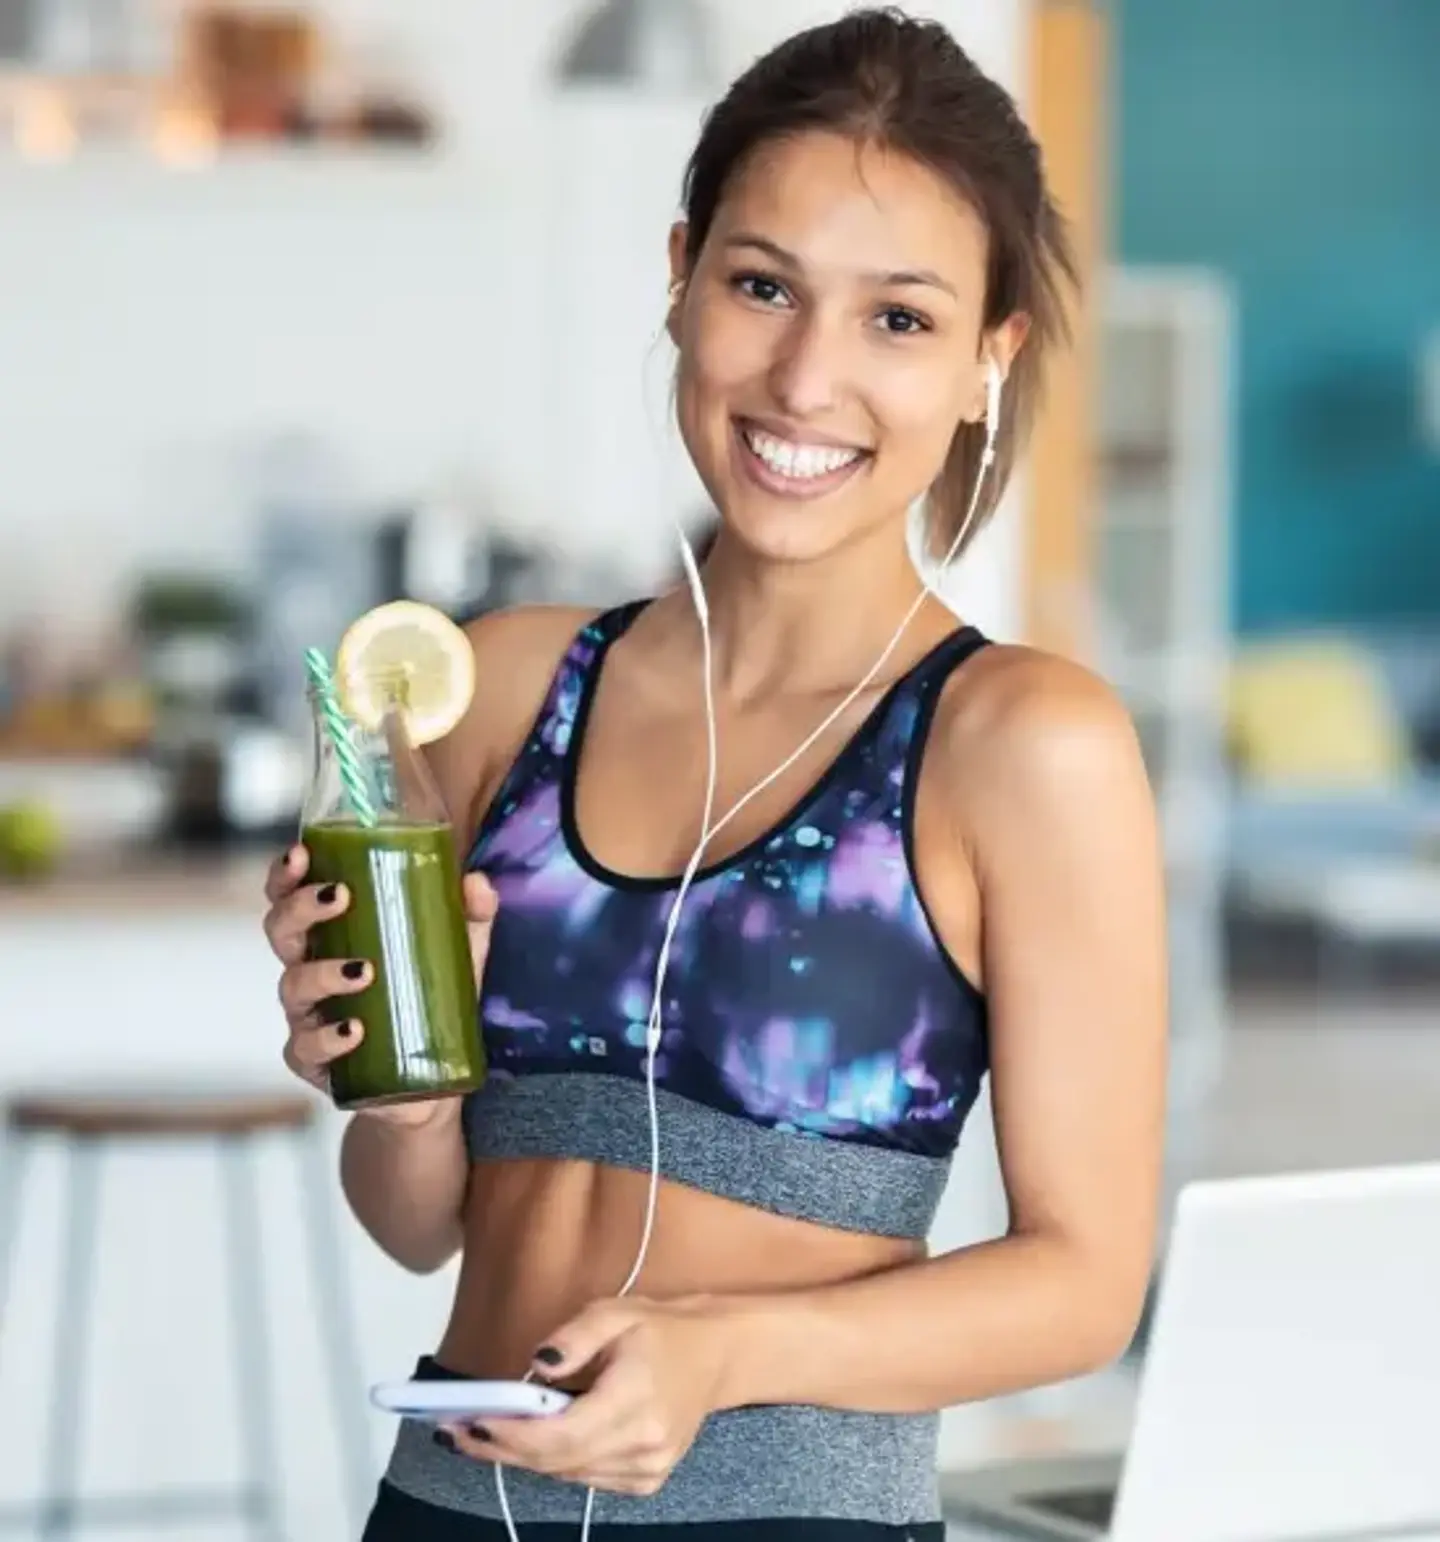 Woman Holding Healthy Drink While In Exercise Gear